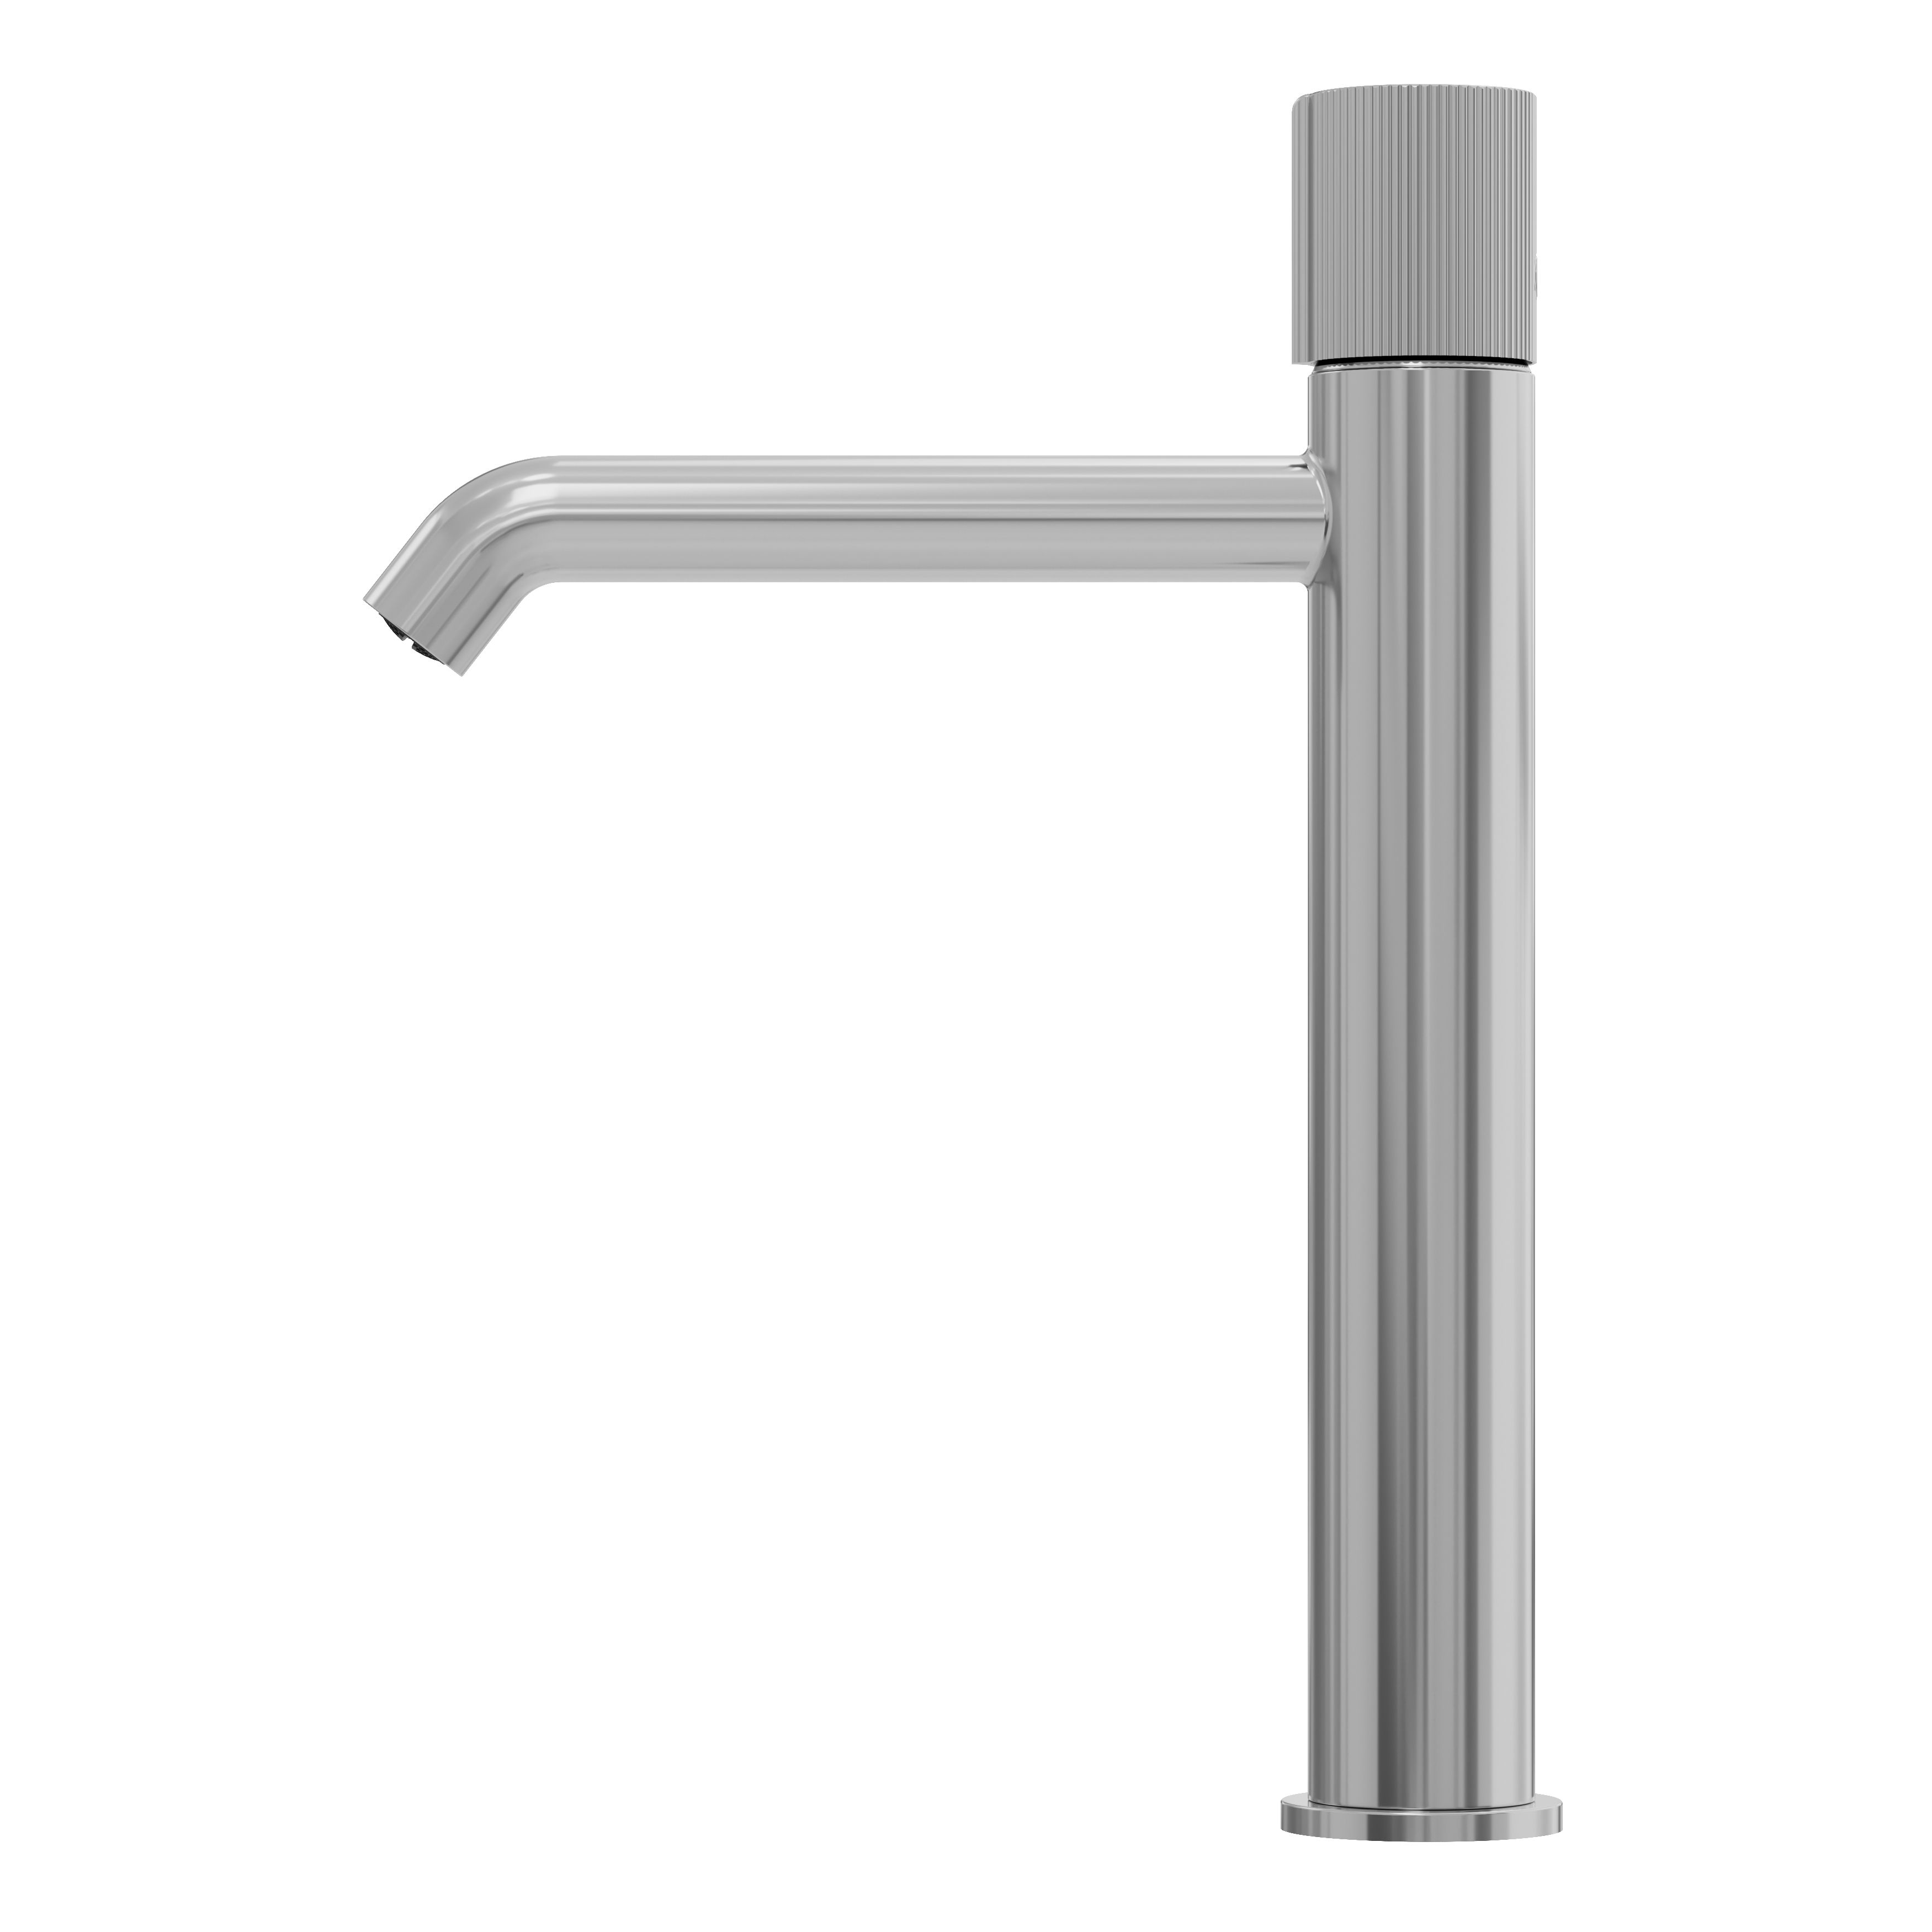 GoodHome Levanna XL Gloss Chrome effect Round Deck-mounted Manual Basin Mixer Tap